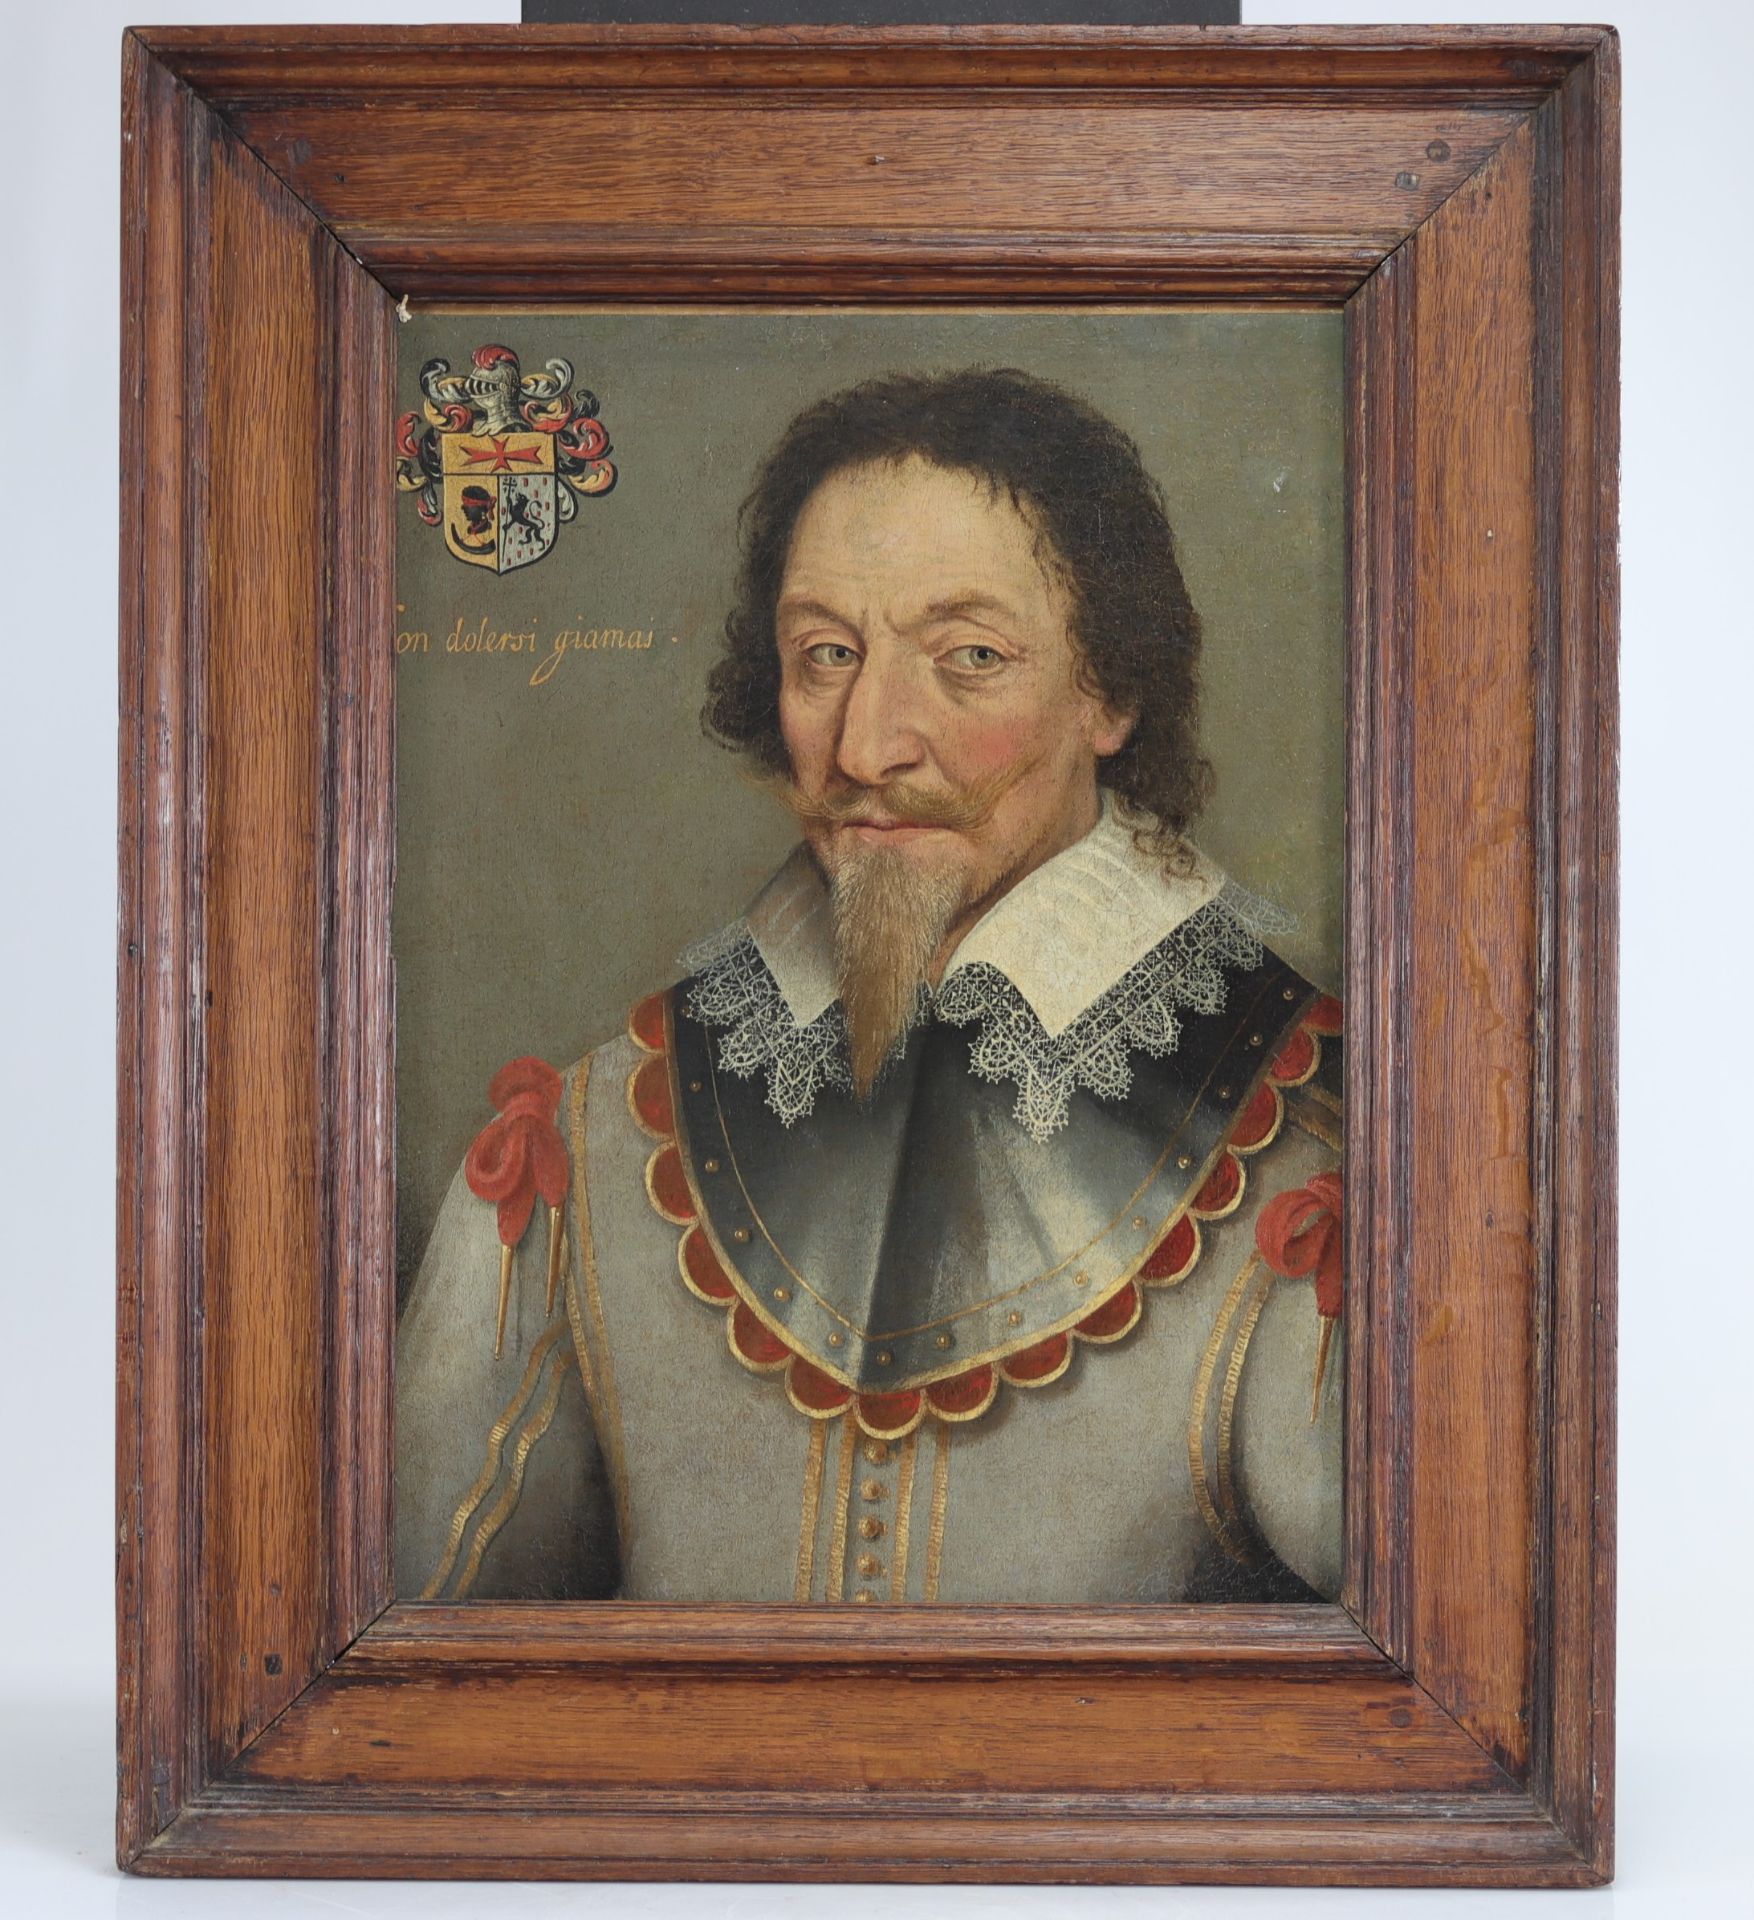 Portrait from Louis XIII period of the 17th century of a Corsican Nobleman from the Antwerp school - Image 2 of 2